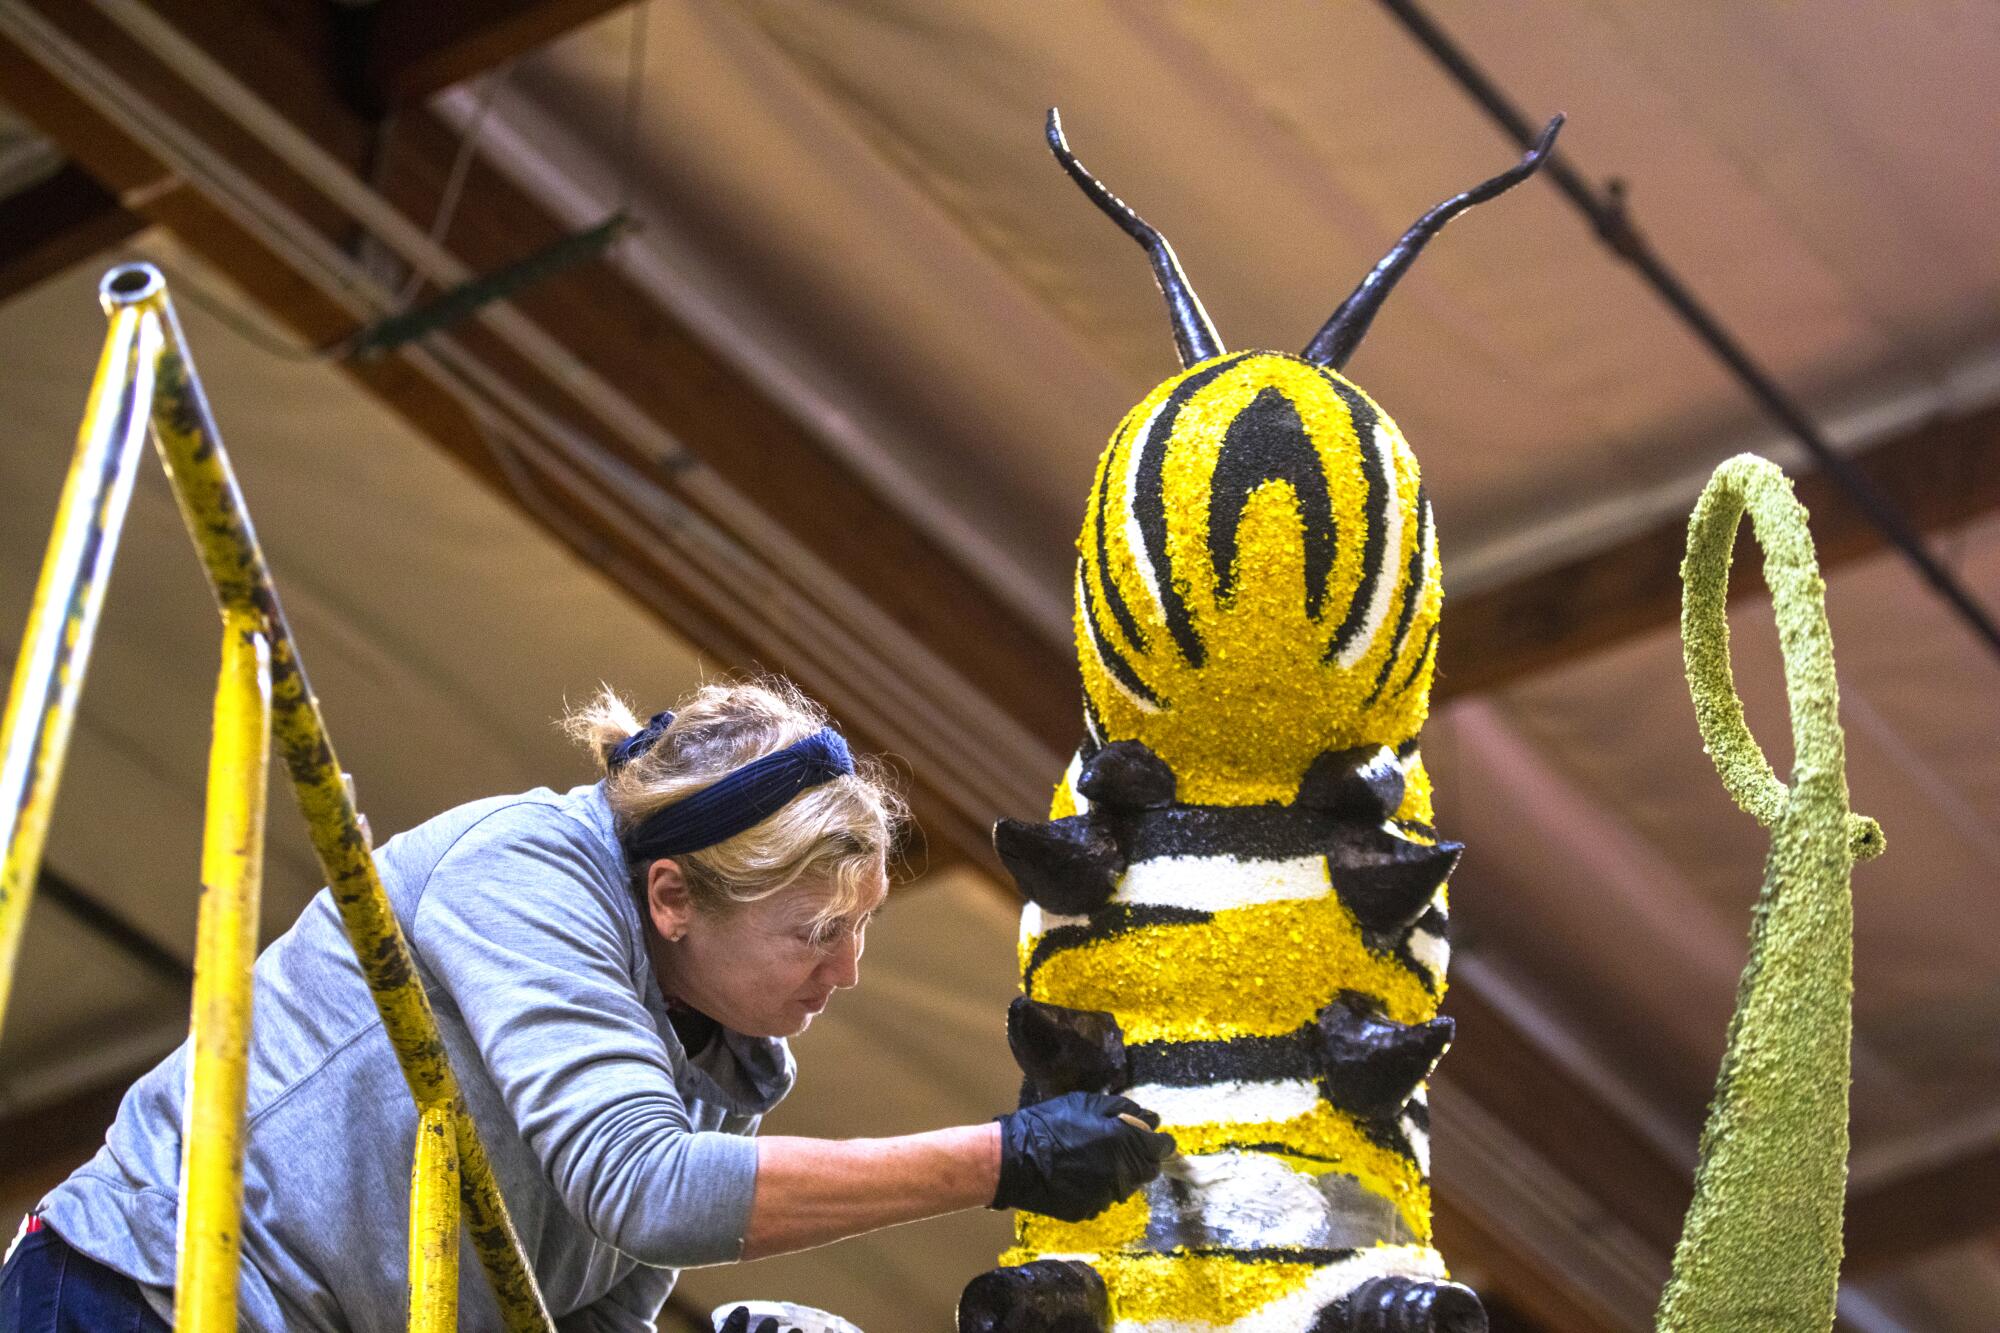 A woman works on a floral-covered bumble bee for a float